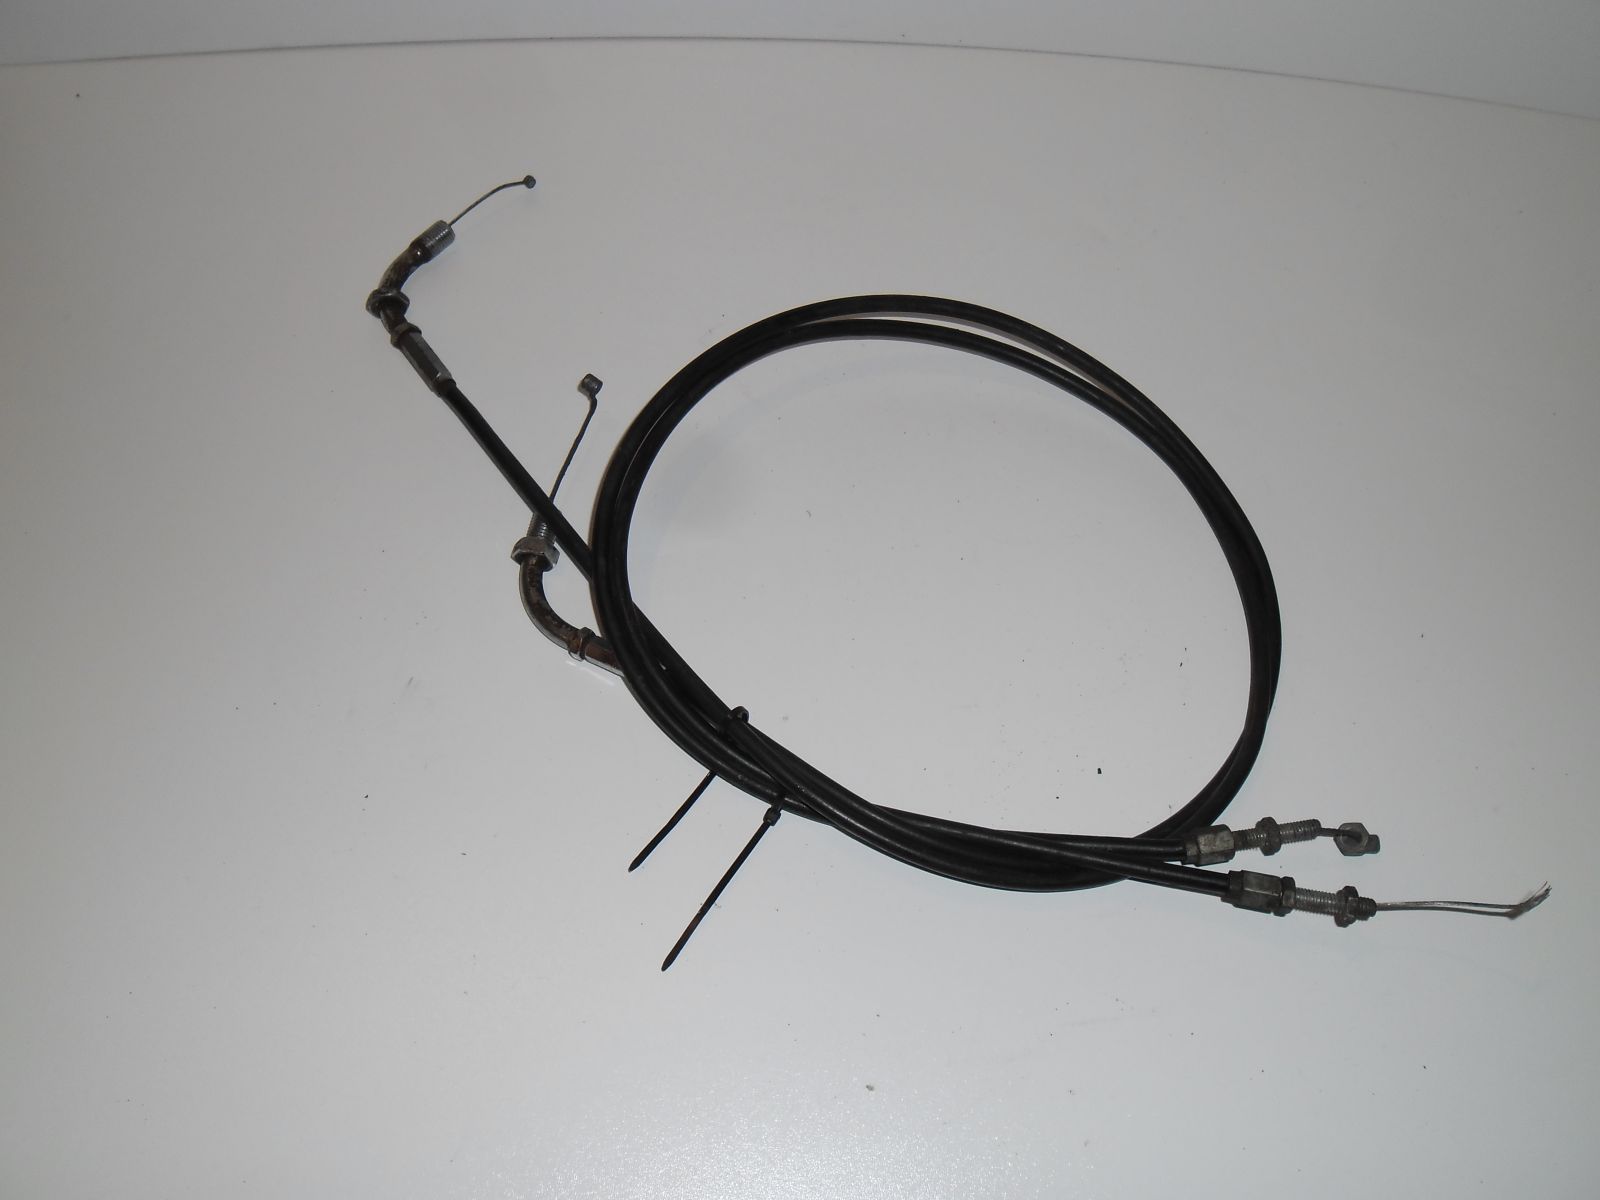 Suzuki GS850 gas cable and link cable